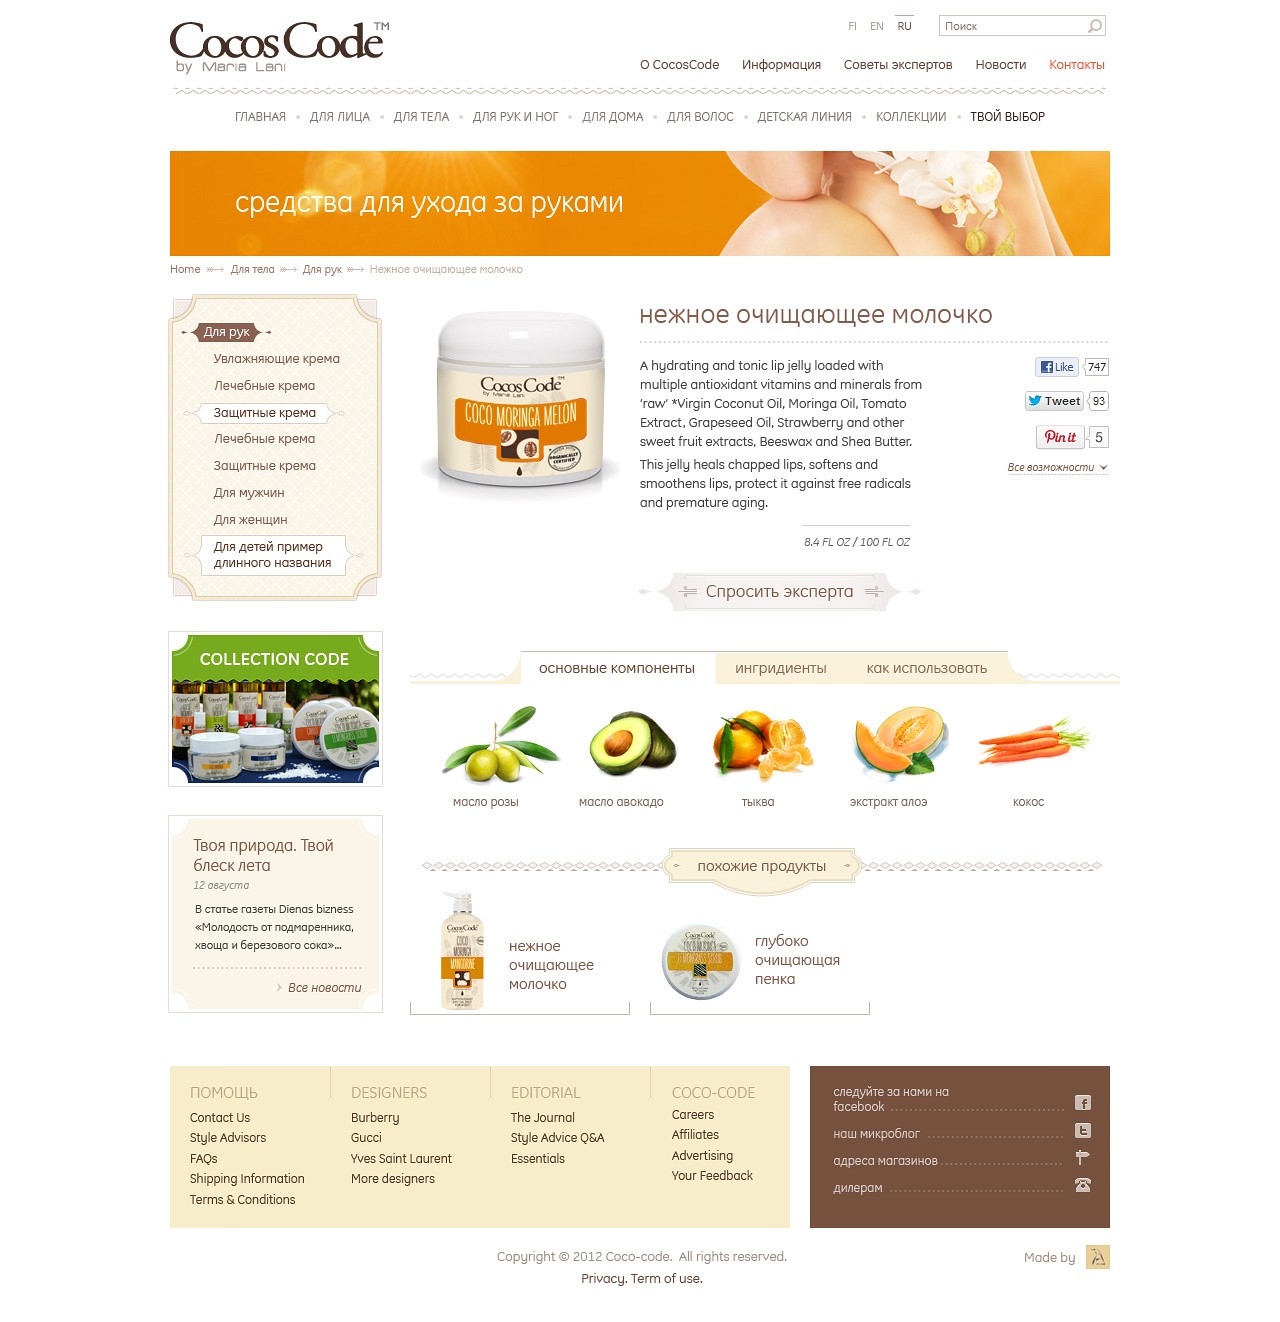 cocos-code-product-page.jpg